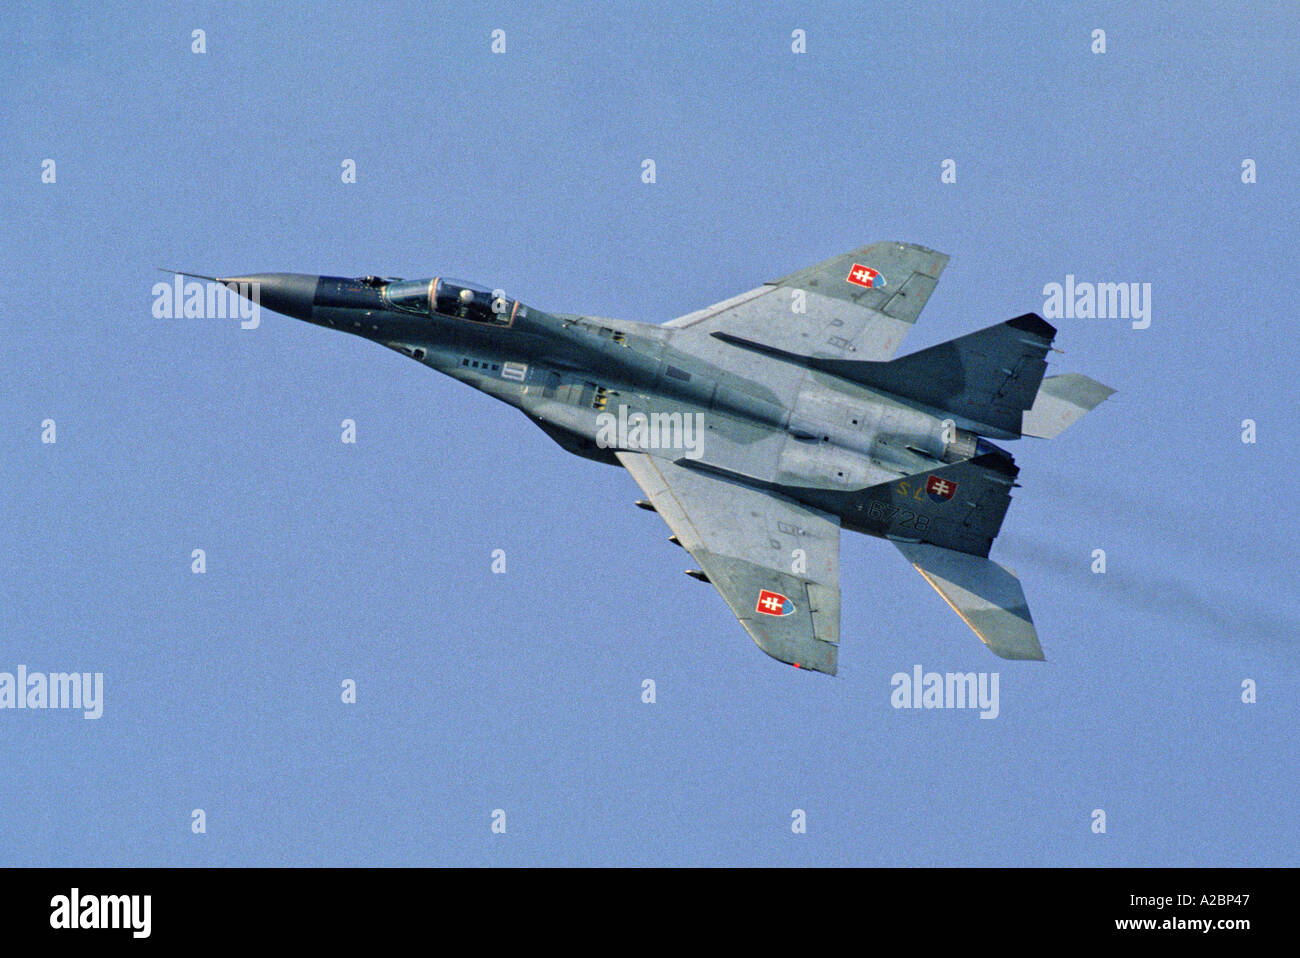 Slovak Air Force MiG-29 Fulcrum fighter aircraft Stock Photo